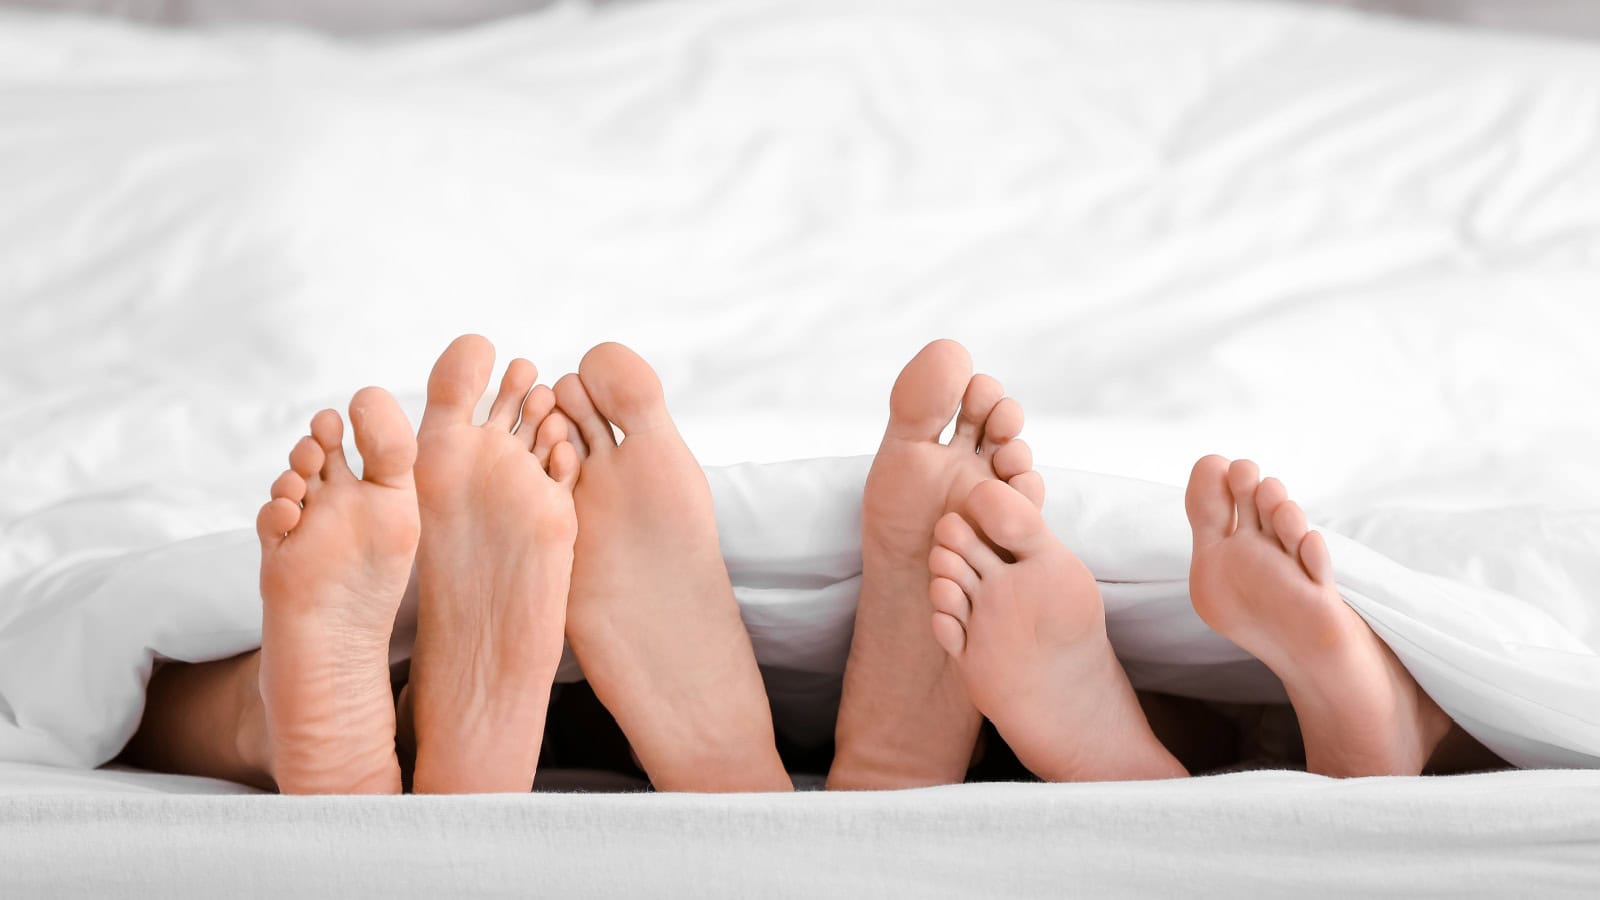 Feet of man and two women lying under blanket in bed. Polyamory concept